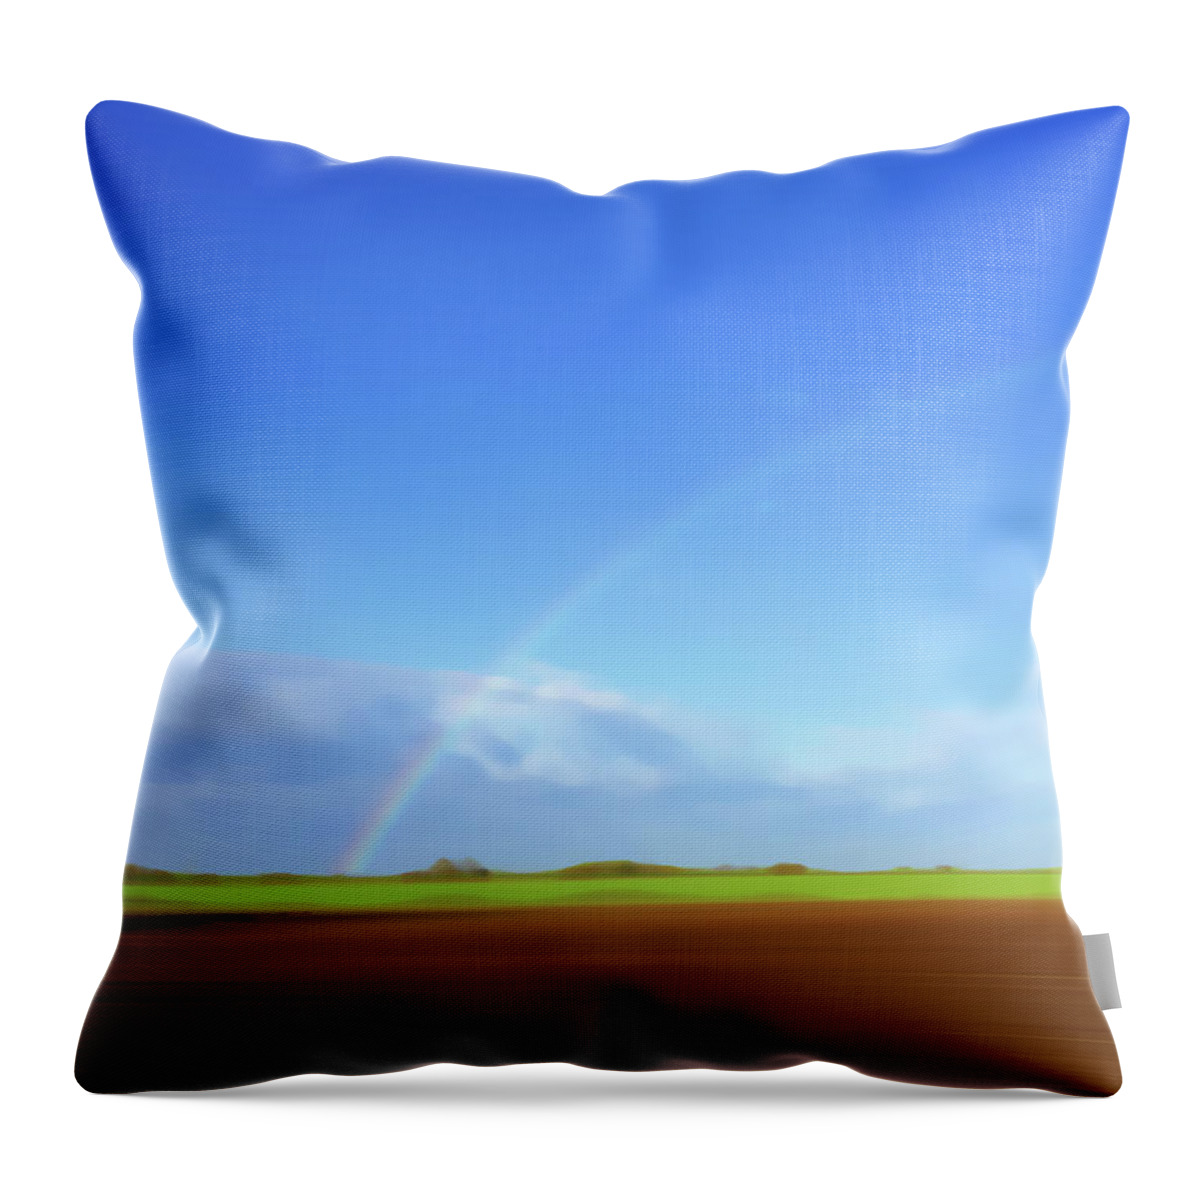 Beauty In Nature Throw Pillow featuring the photograph Rainbow In Field by Ikon Ikon Images